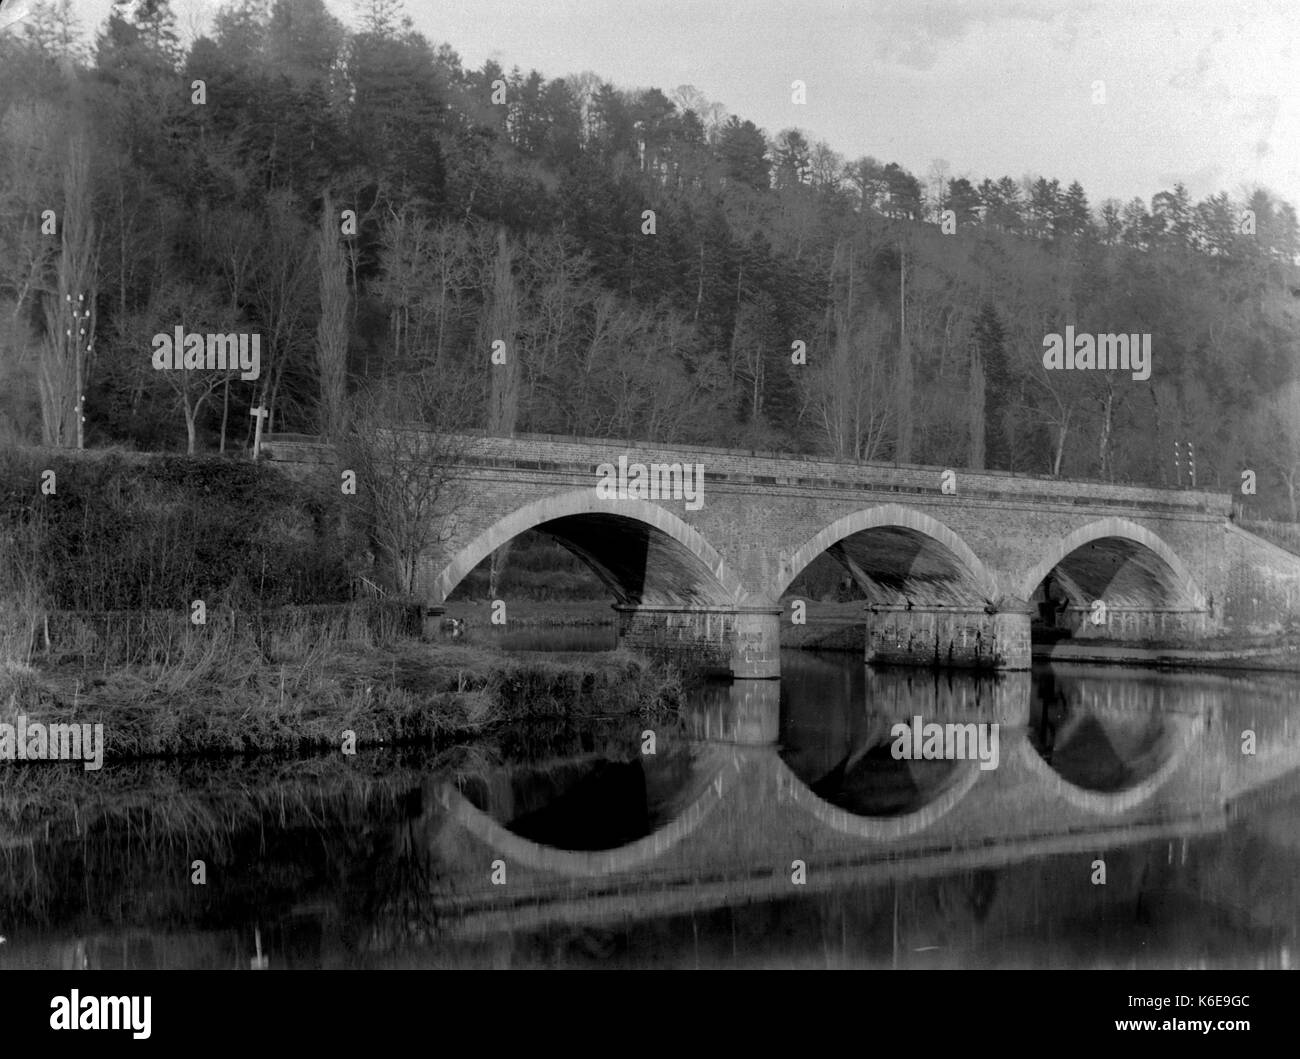 AJAXNETPHOTO. 1891-1910 (APPROX). SAINT-LO, FRANCE. - REFLECTION IN LA VIRE RIVER OF THE RAIL BRIDGE BUISSONNIERE WITH THREE ARCHES AND WOODED LANDSCAPE.PHOTOGRAPHER:UNKNOWN © DIGITAL IMAGE COPYRIGHT AJAX VINTAGE PICTURE LIBRARY SOURCE: AJAX VINTAGE PICTURE LIBRARY COLLECTION REF:AVL FRA 1890 B29X1215 Stock Photo